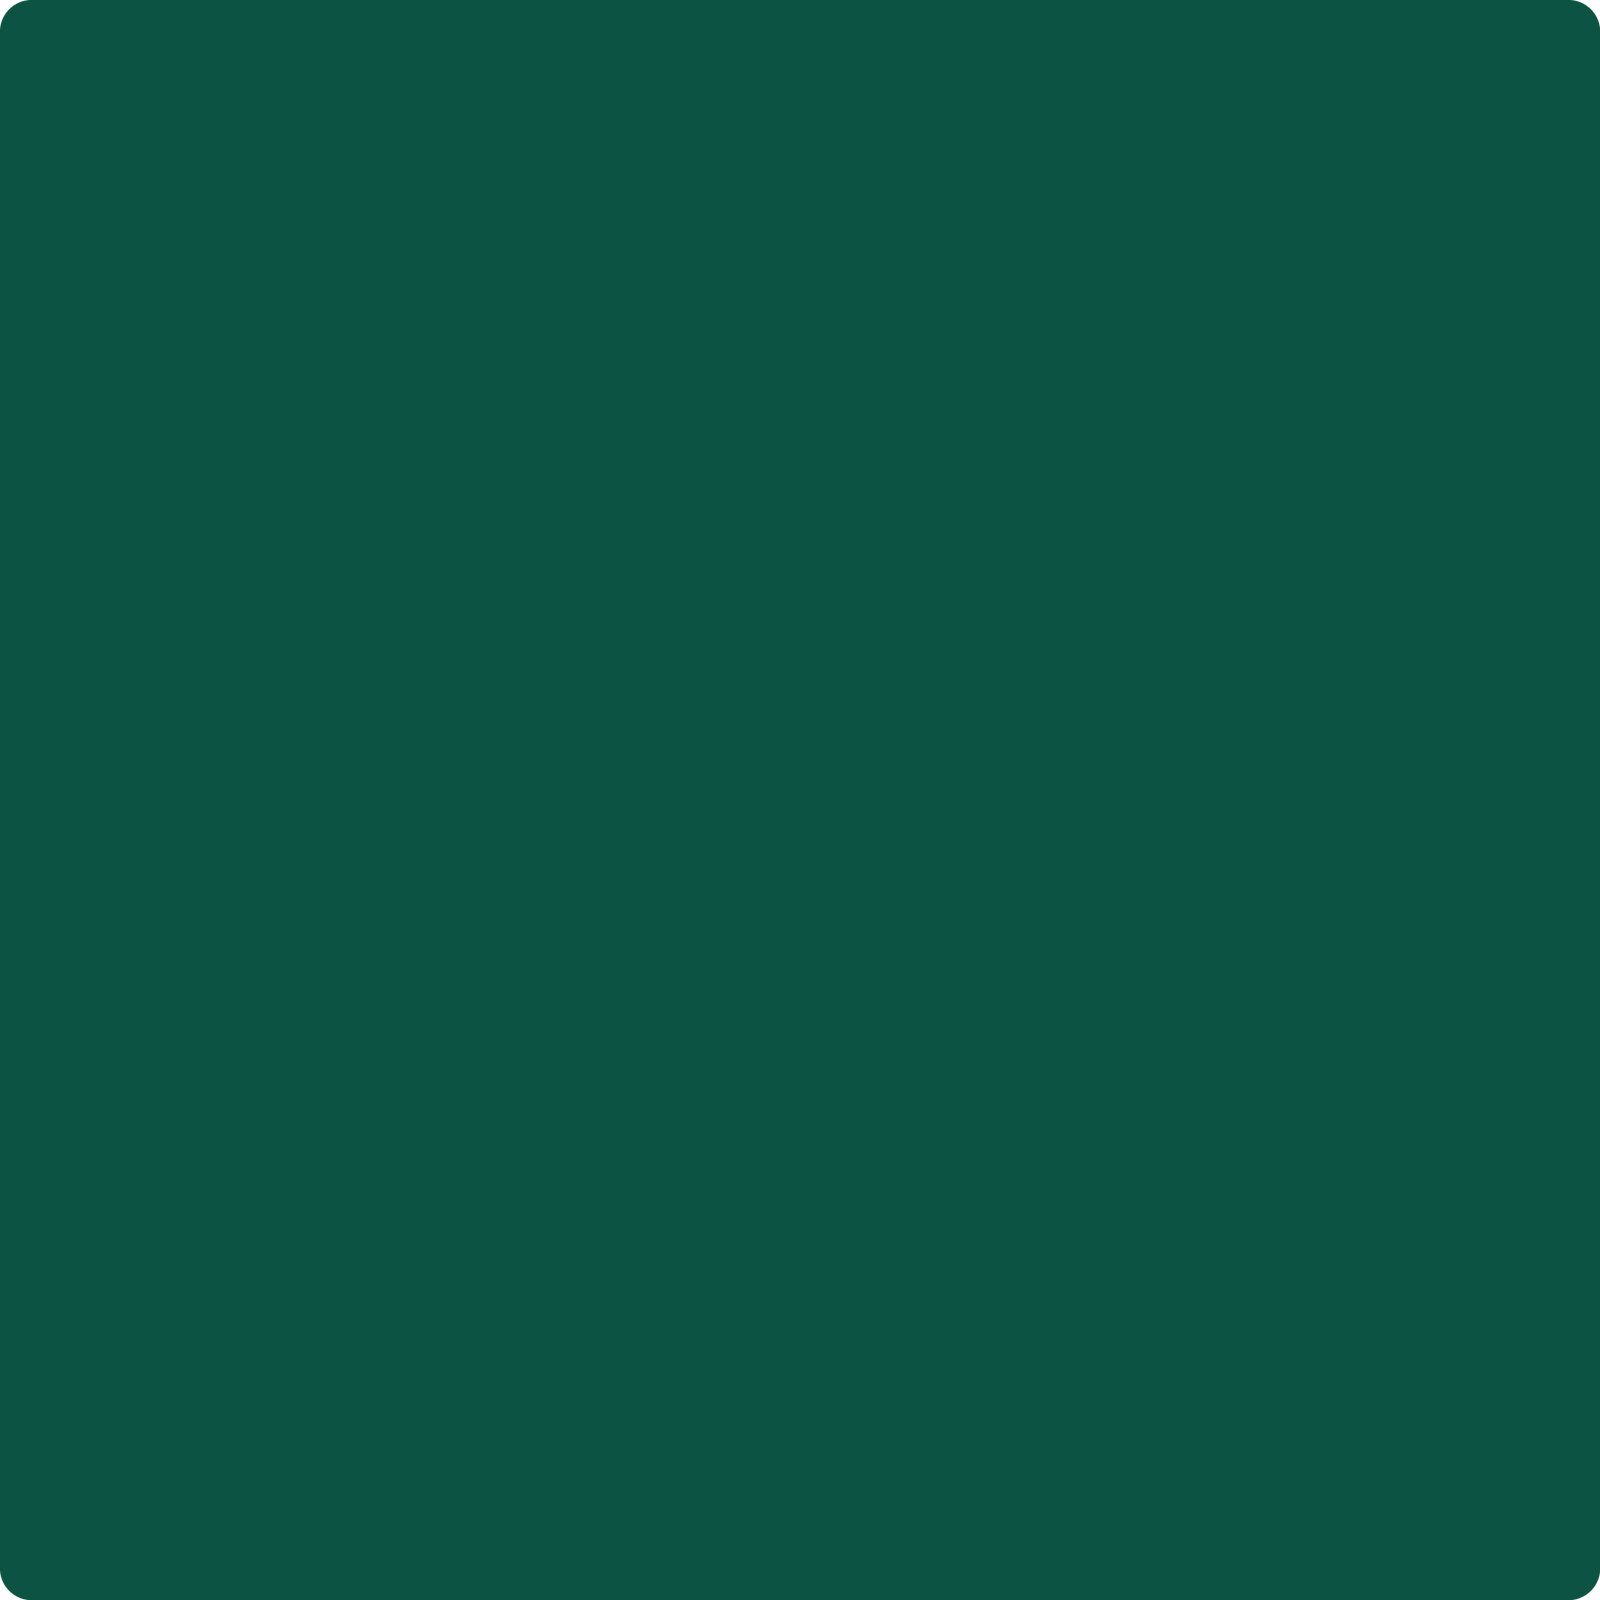 2140-10 Fatigue Green a Paint Color by Benjamin Moore